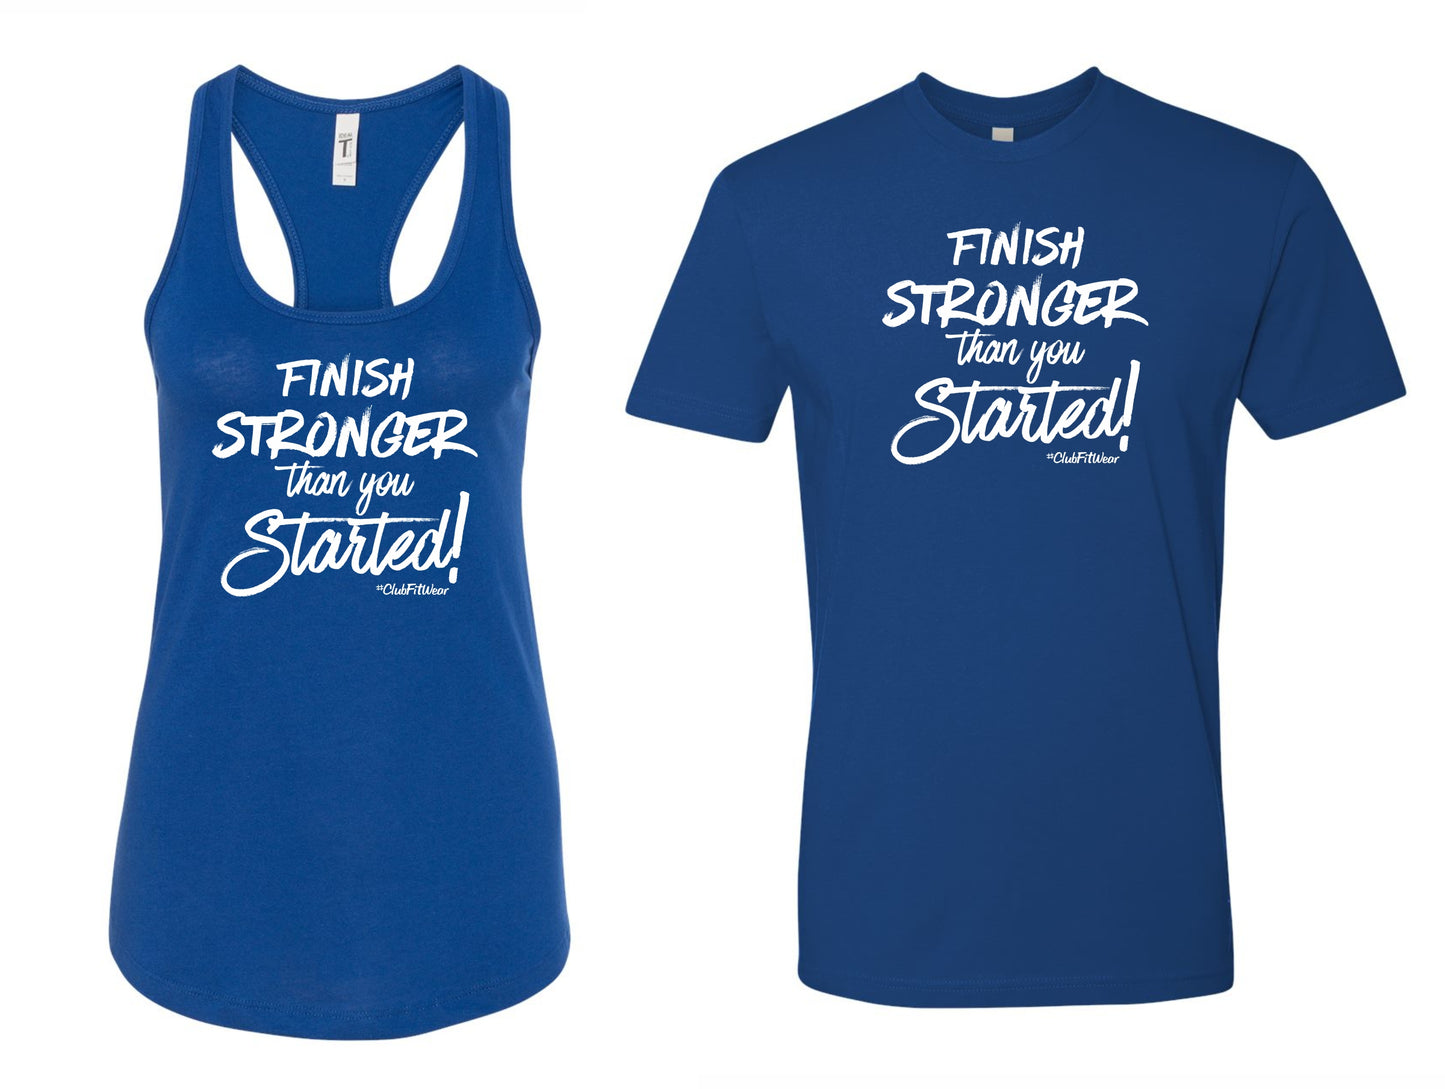 Finish Stronger than you Started